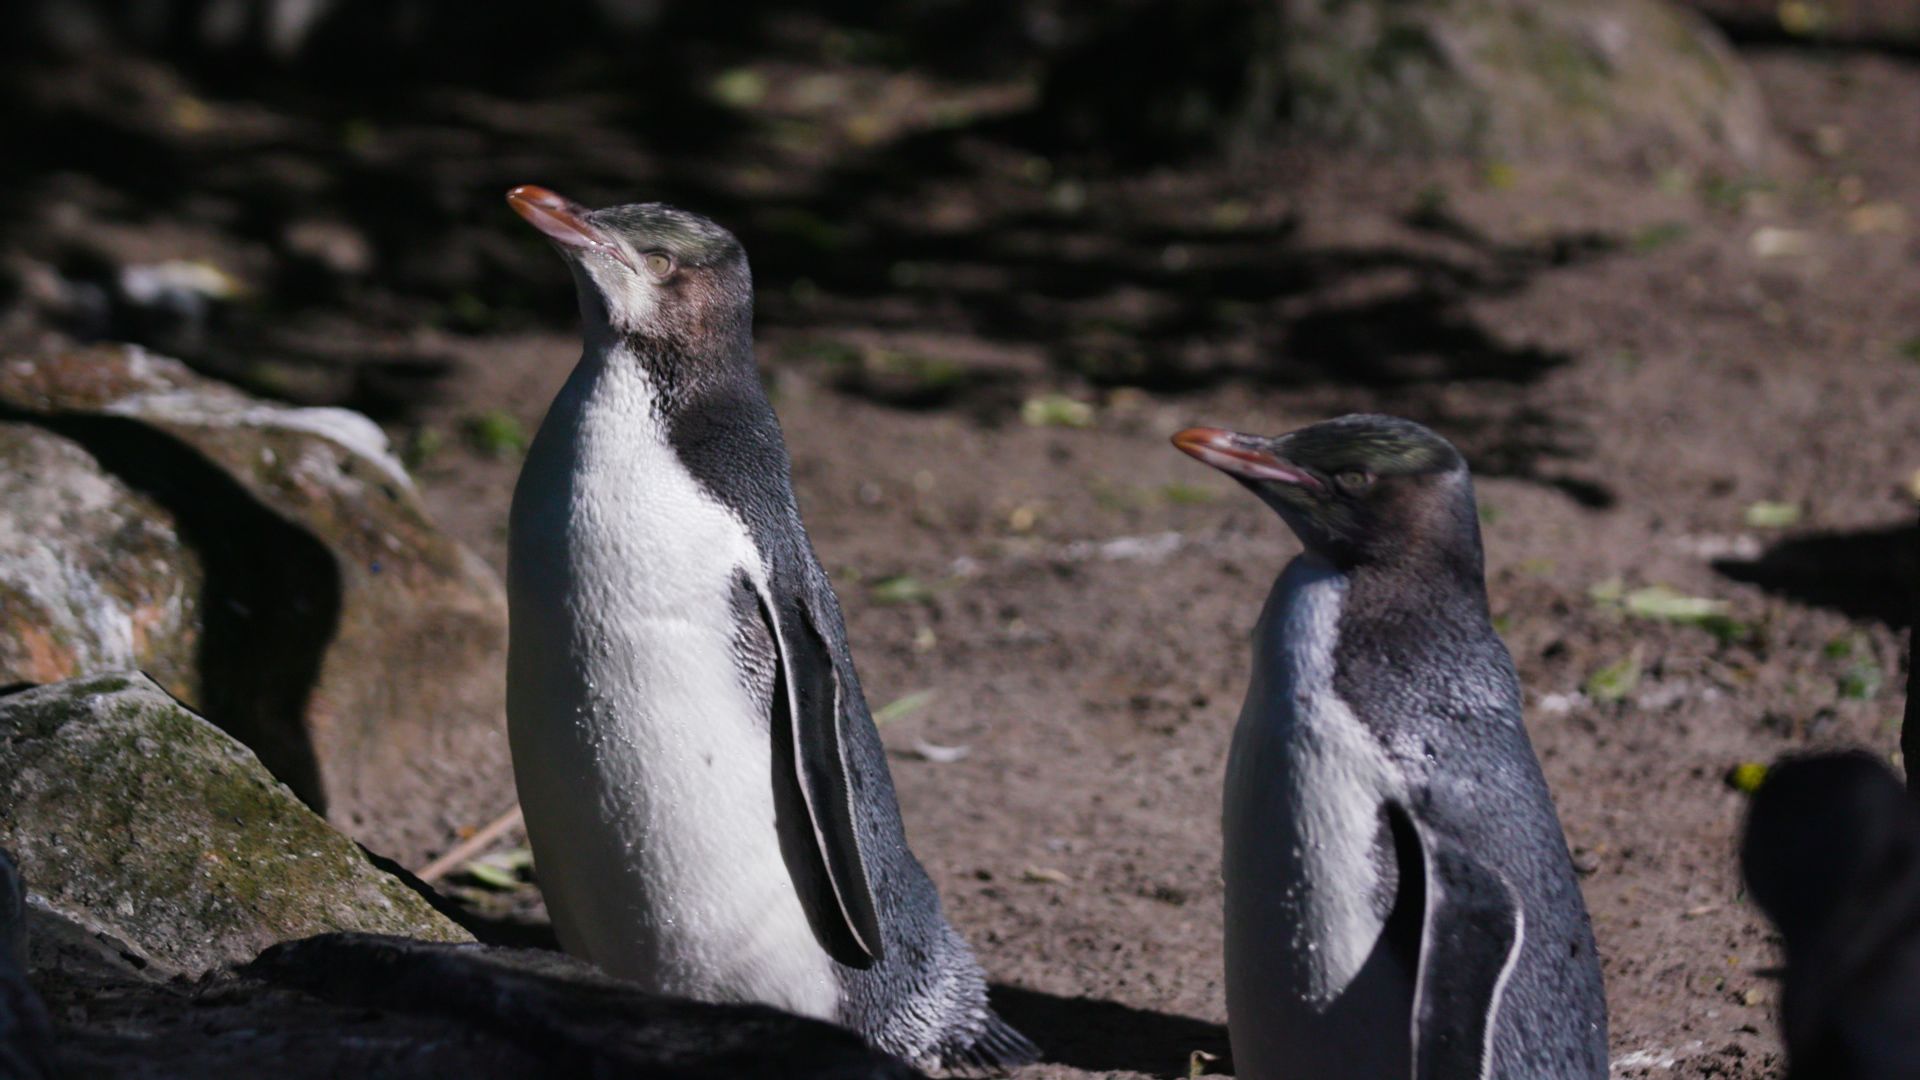 At <a href="index.php?page=&url=https%3A%2F%2Fpenguinplace.co.nz%2F" target="_blank" target="_blank">Penguin Place</a> on the Otago Peninsula, New Zealand, conservationists help sick and starving birds recover. Hoiho make up 98% of the birds that pass through, says Jason van Zanten, conservation manager at Penguin Place. 